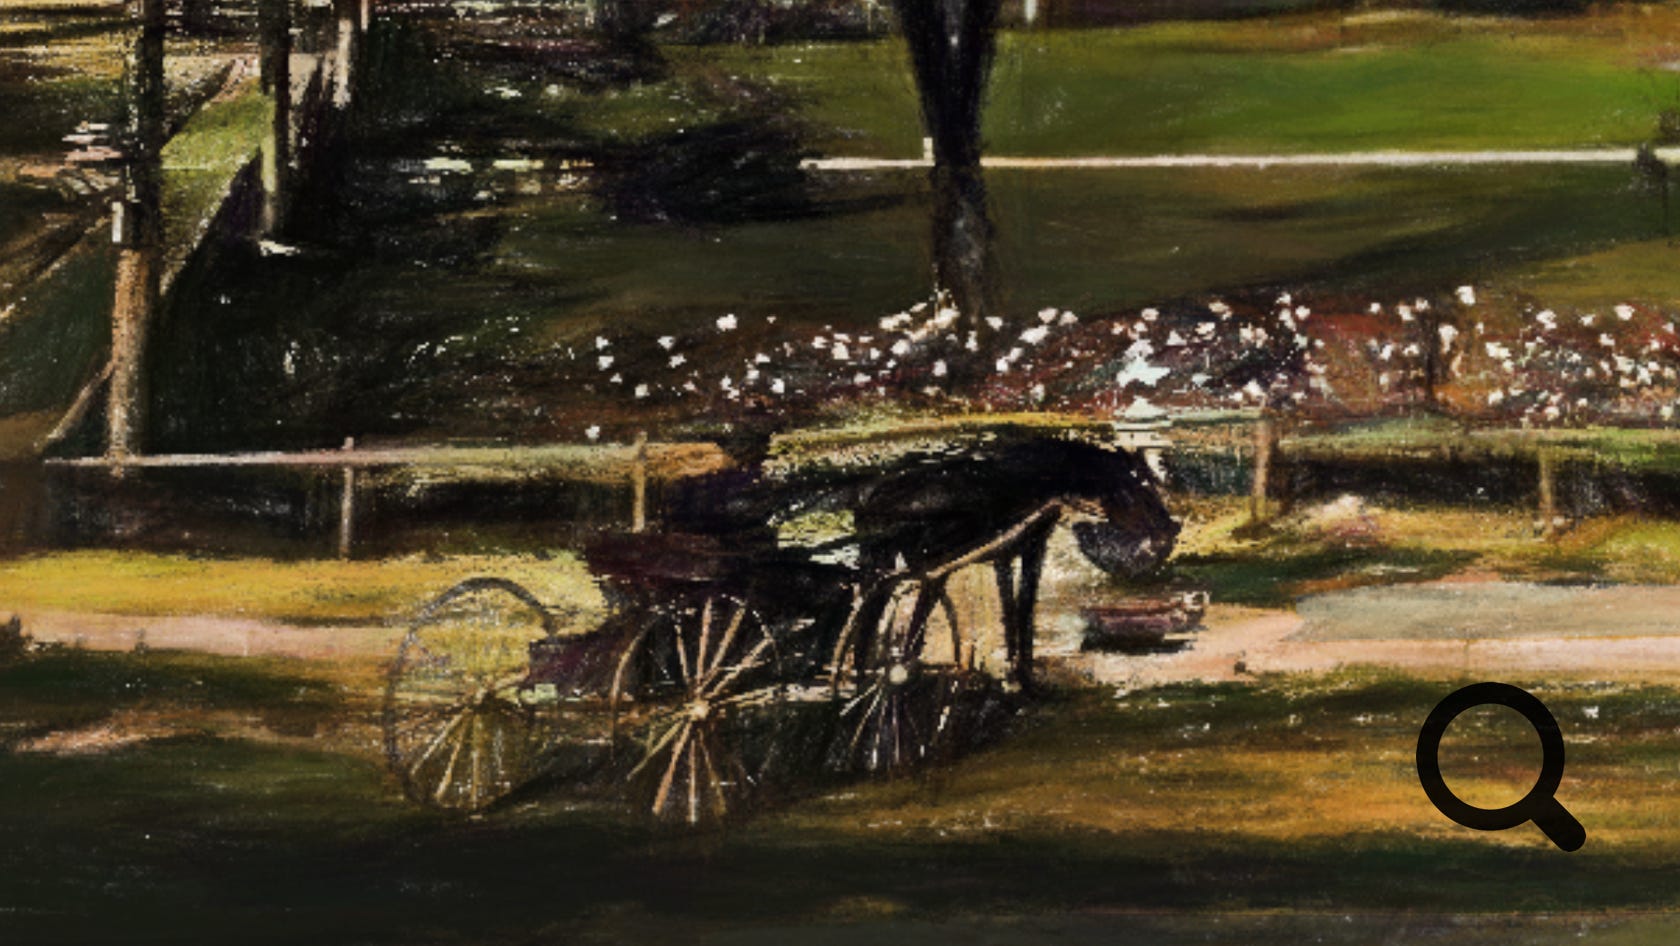 Colorized and artistic versions of historical Butler NJ images. Horse and buggy shown.